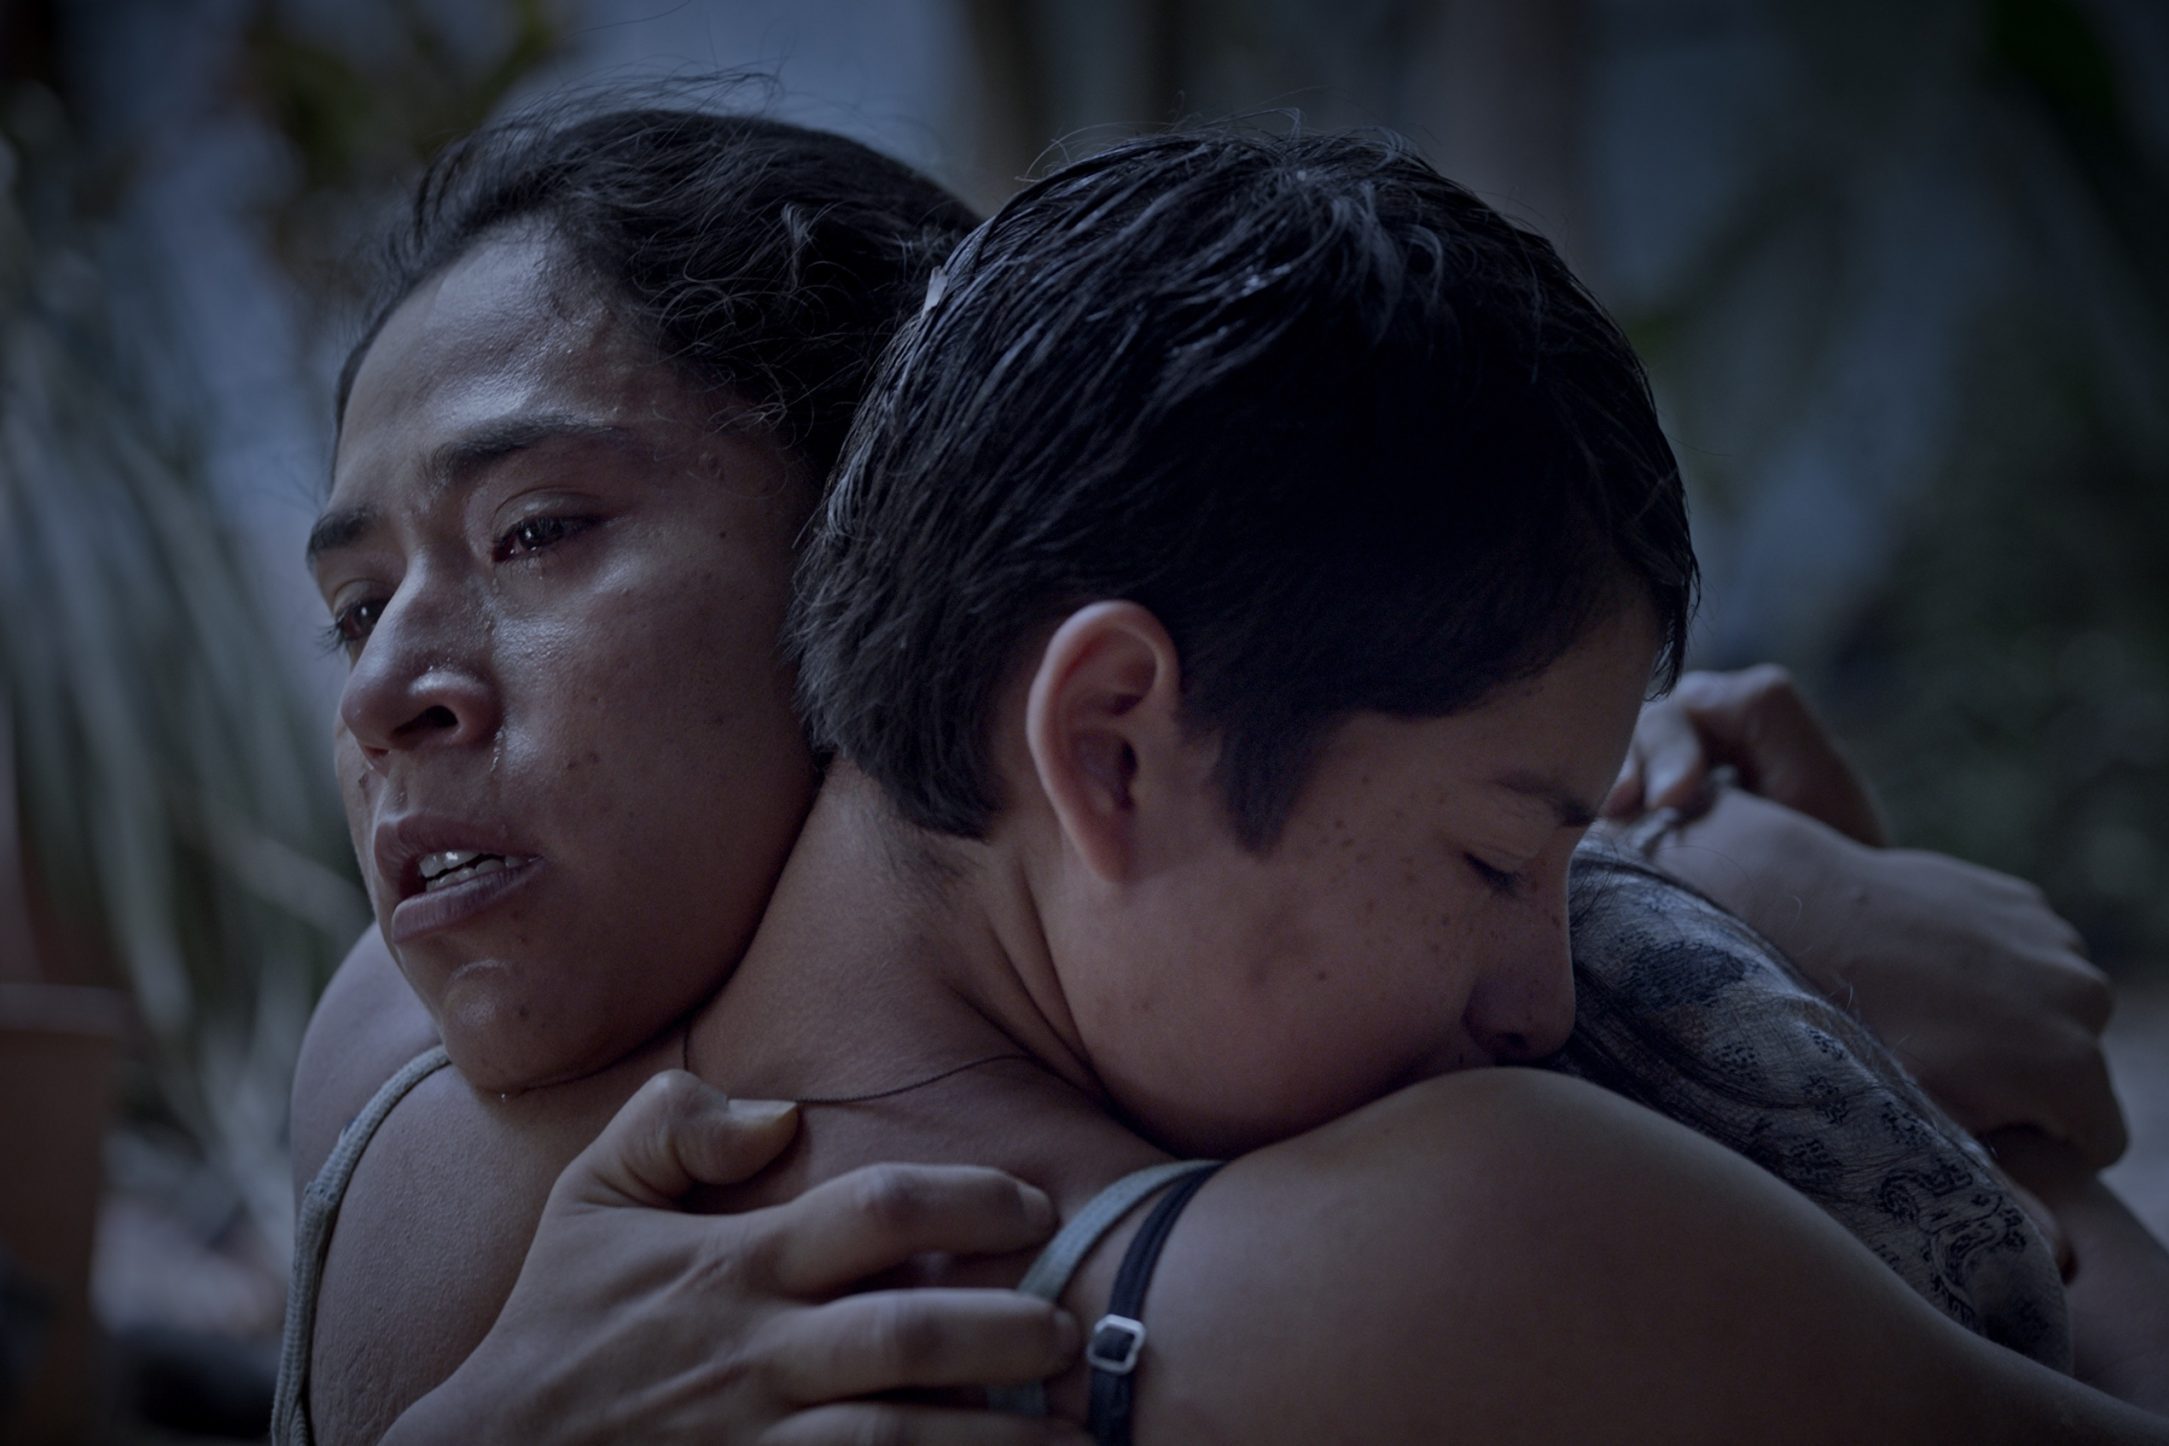 Characters Rita and Ana hug in the film Prayers for the Stolen